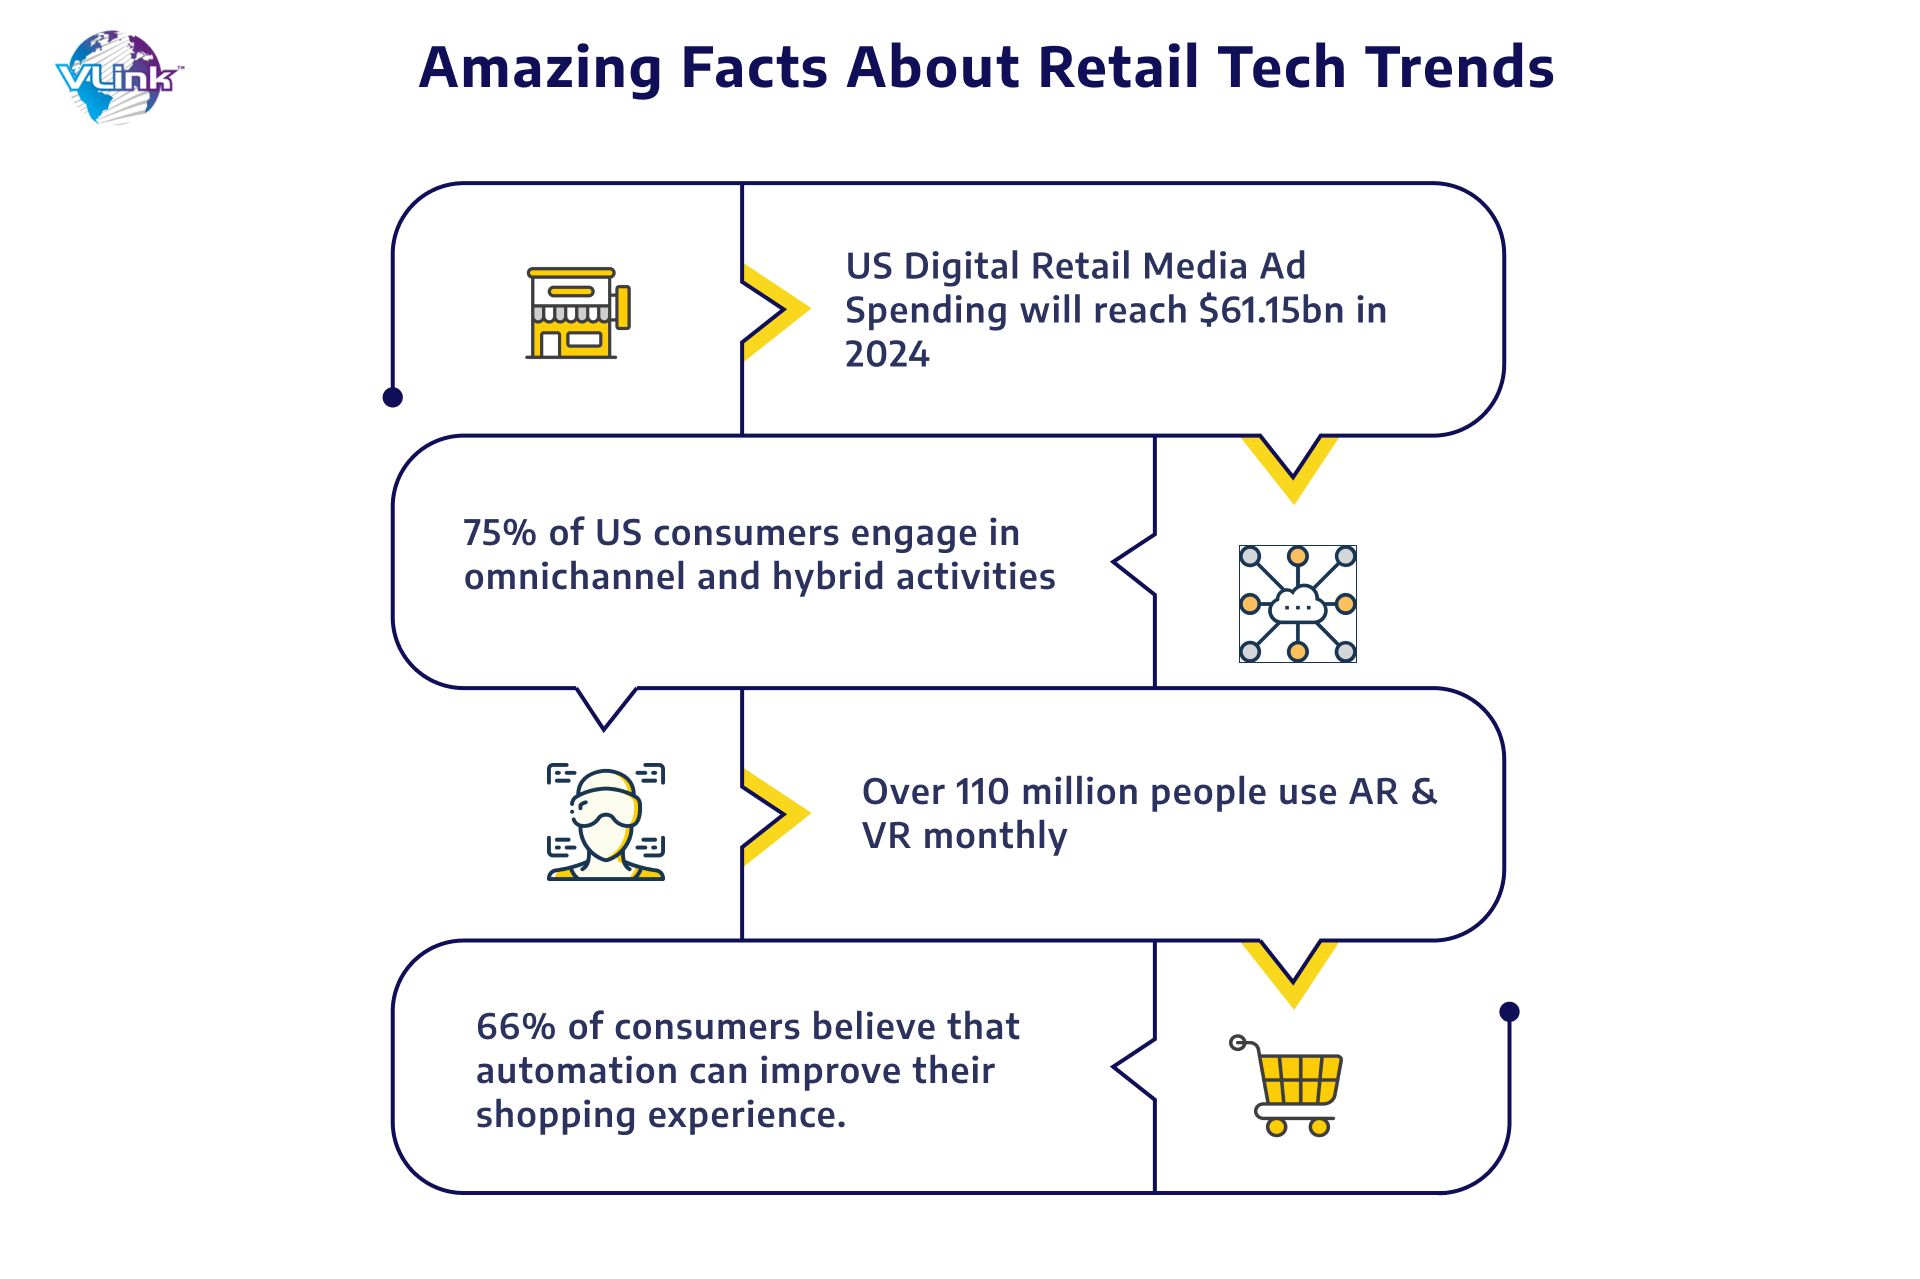 Amazing facts about retail tech trends